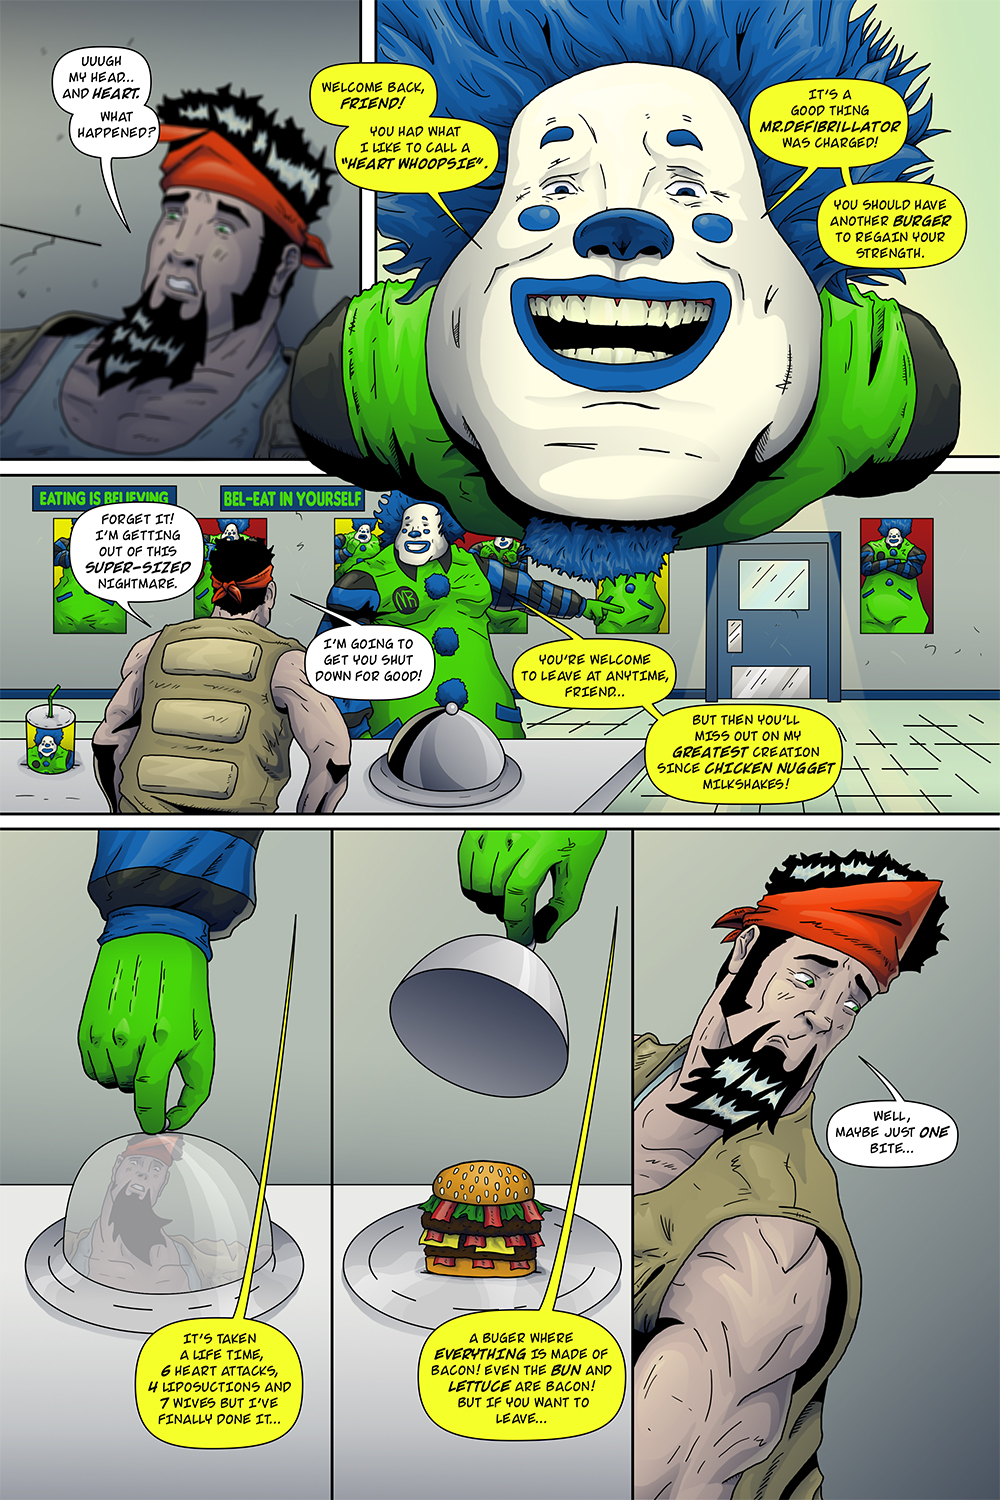 MISSION 009: PAGE 10 “HEART WHOOPSIE”